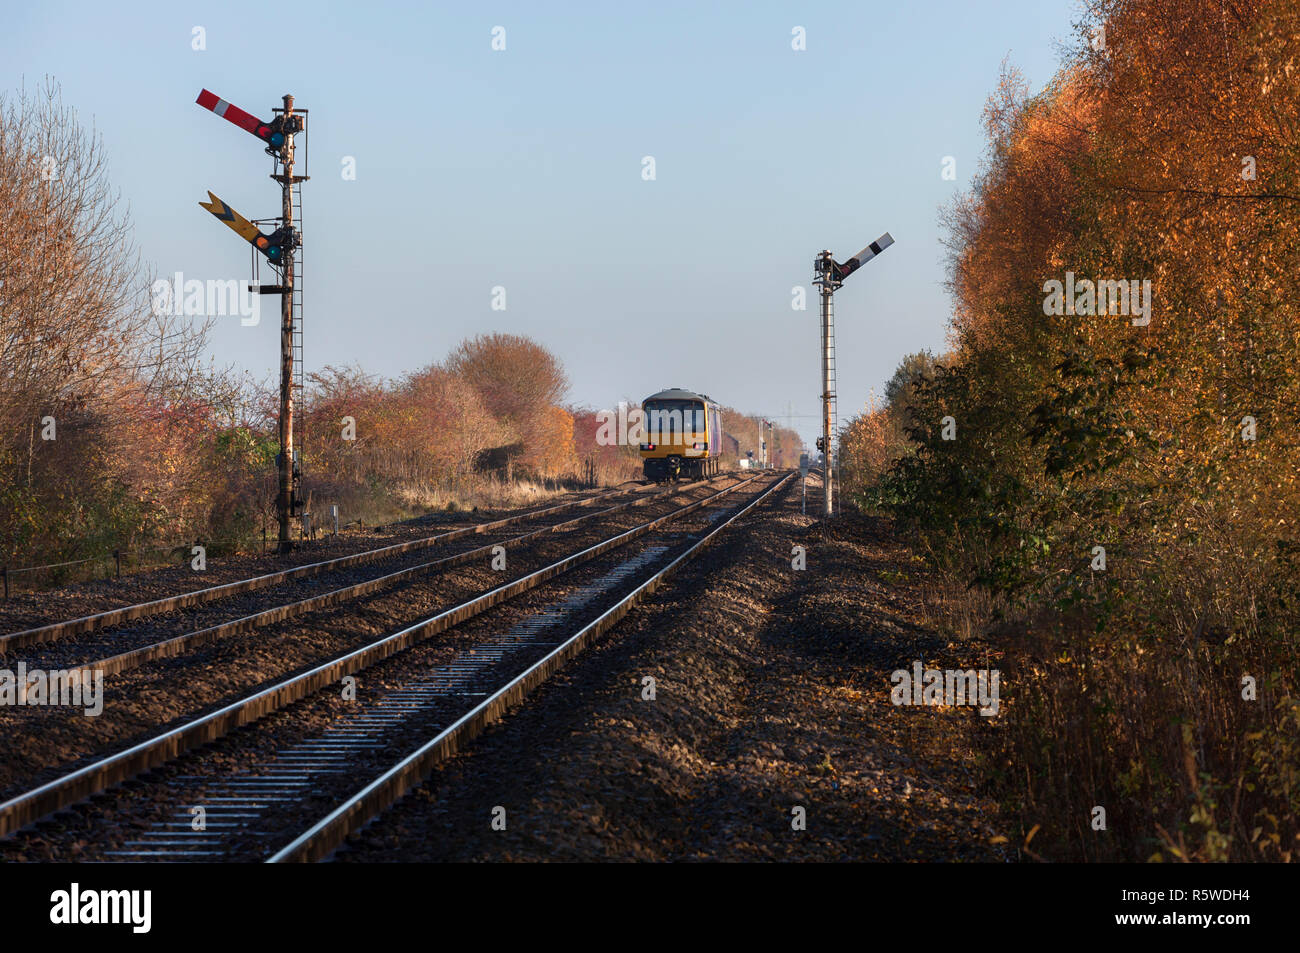 Arriva Northern rail class 144 pacer train passing the mechanical semaphore railway signals at Gilberdyke showing both home and distant signals Stock Photo